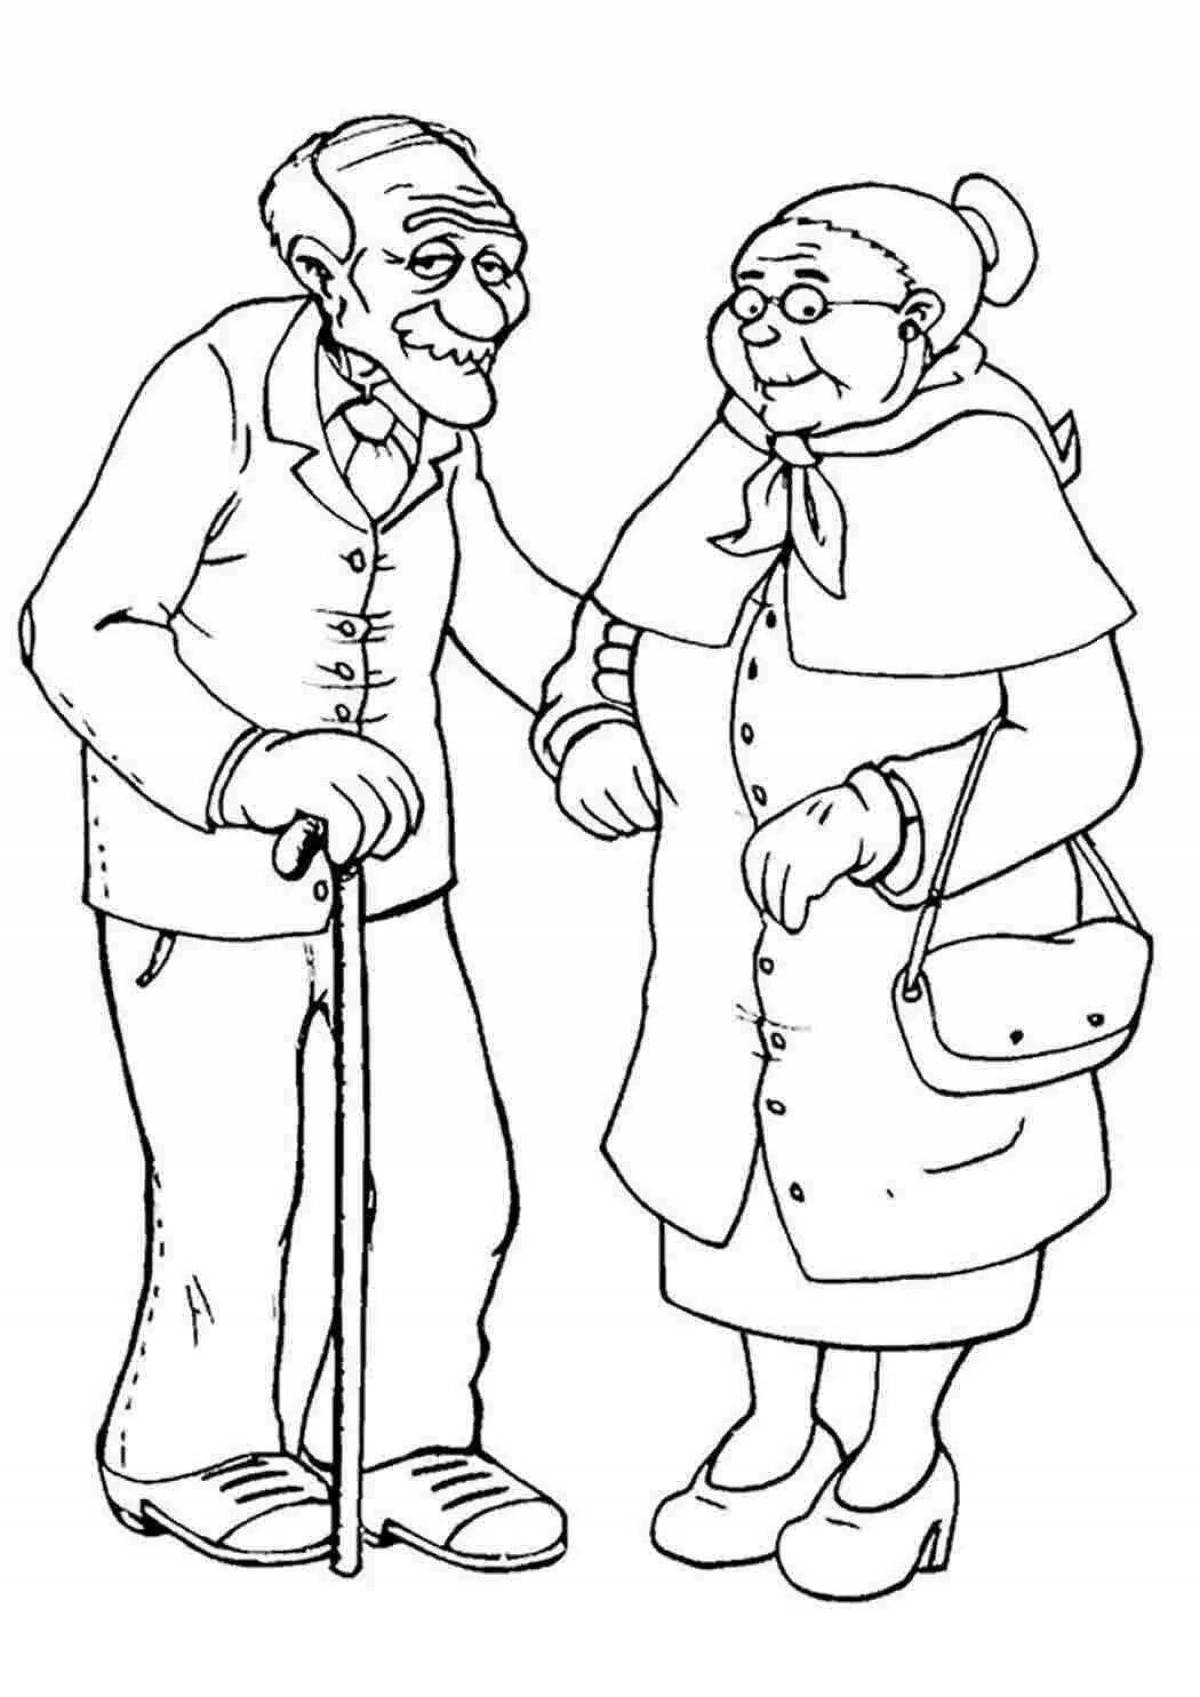 Fun coloring book for older people